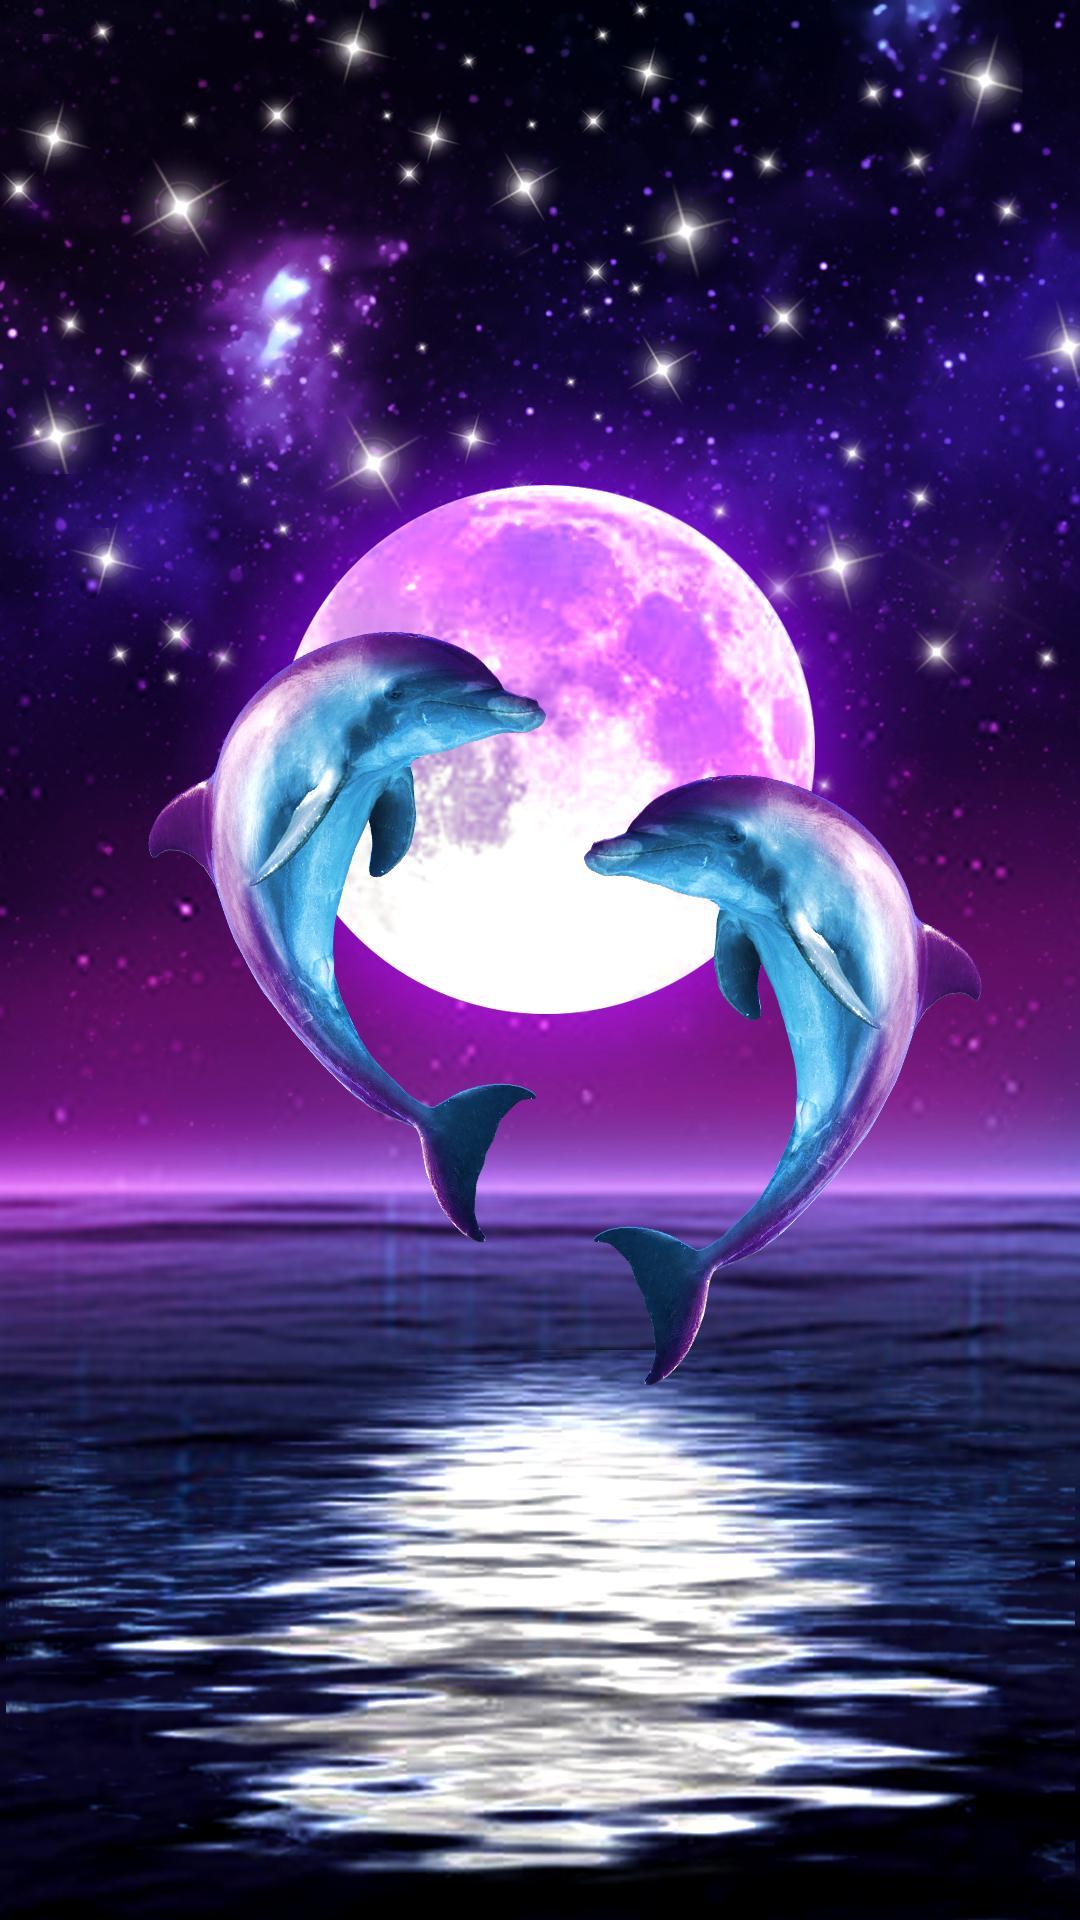 Update 63+ dolphins wallpaper latest - in.cdgdbentre